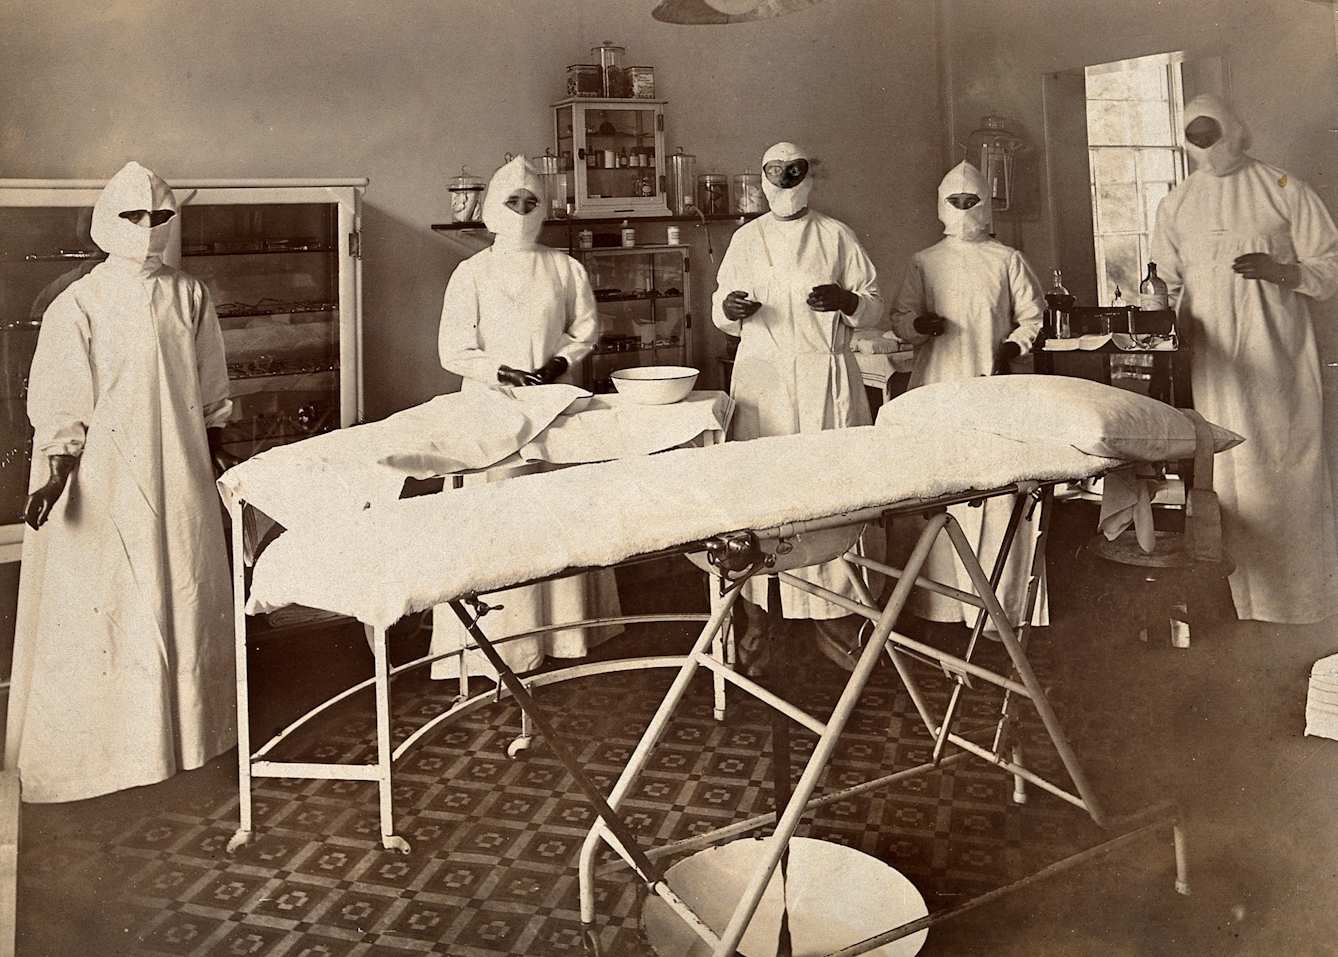 Photograph of operating theatre staff wearing white gowns, mouth-masks, and rubber gloves at Wotton Lodge, Gloucester around 1909.